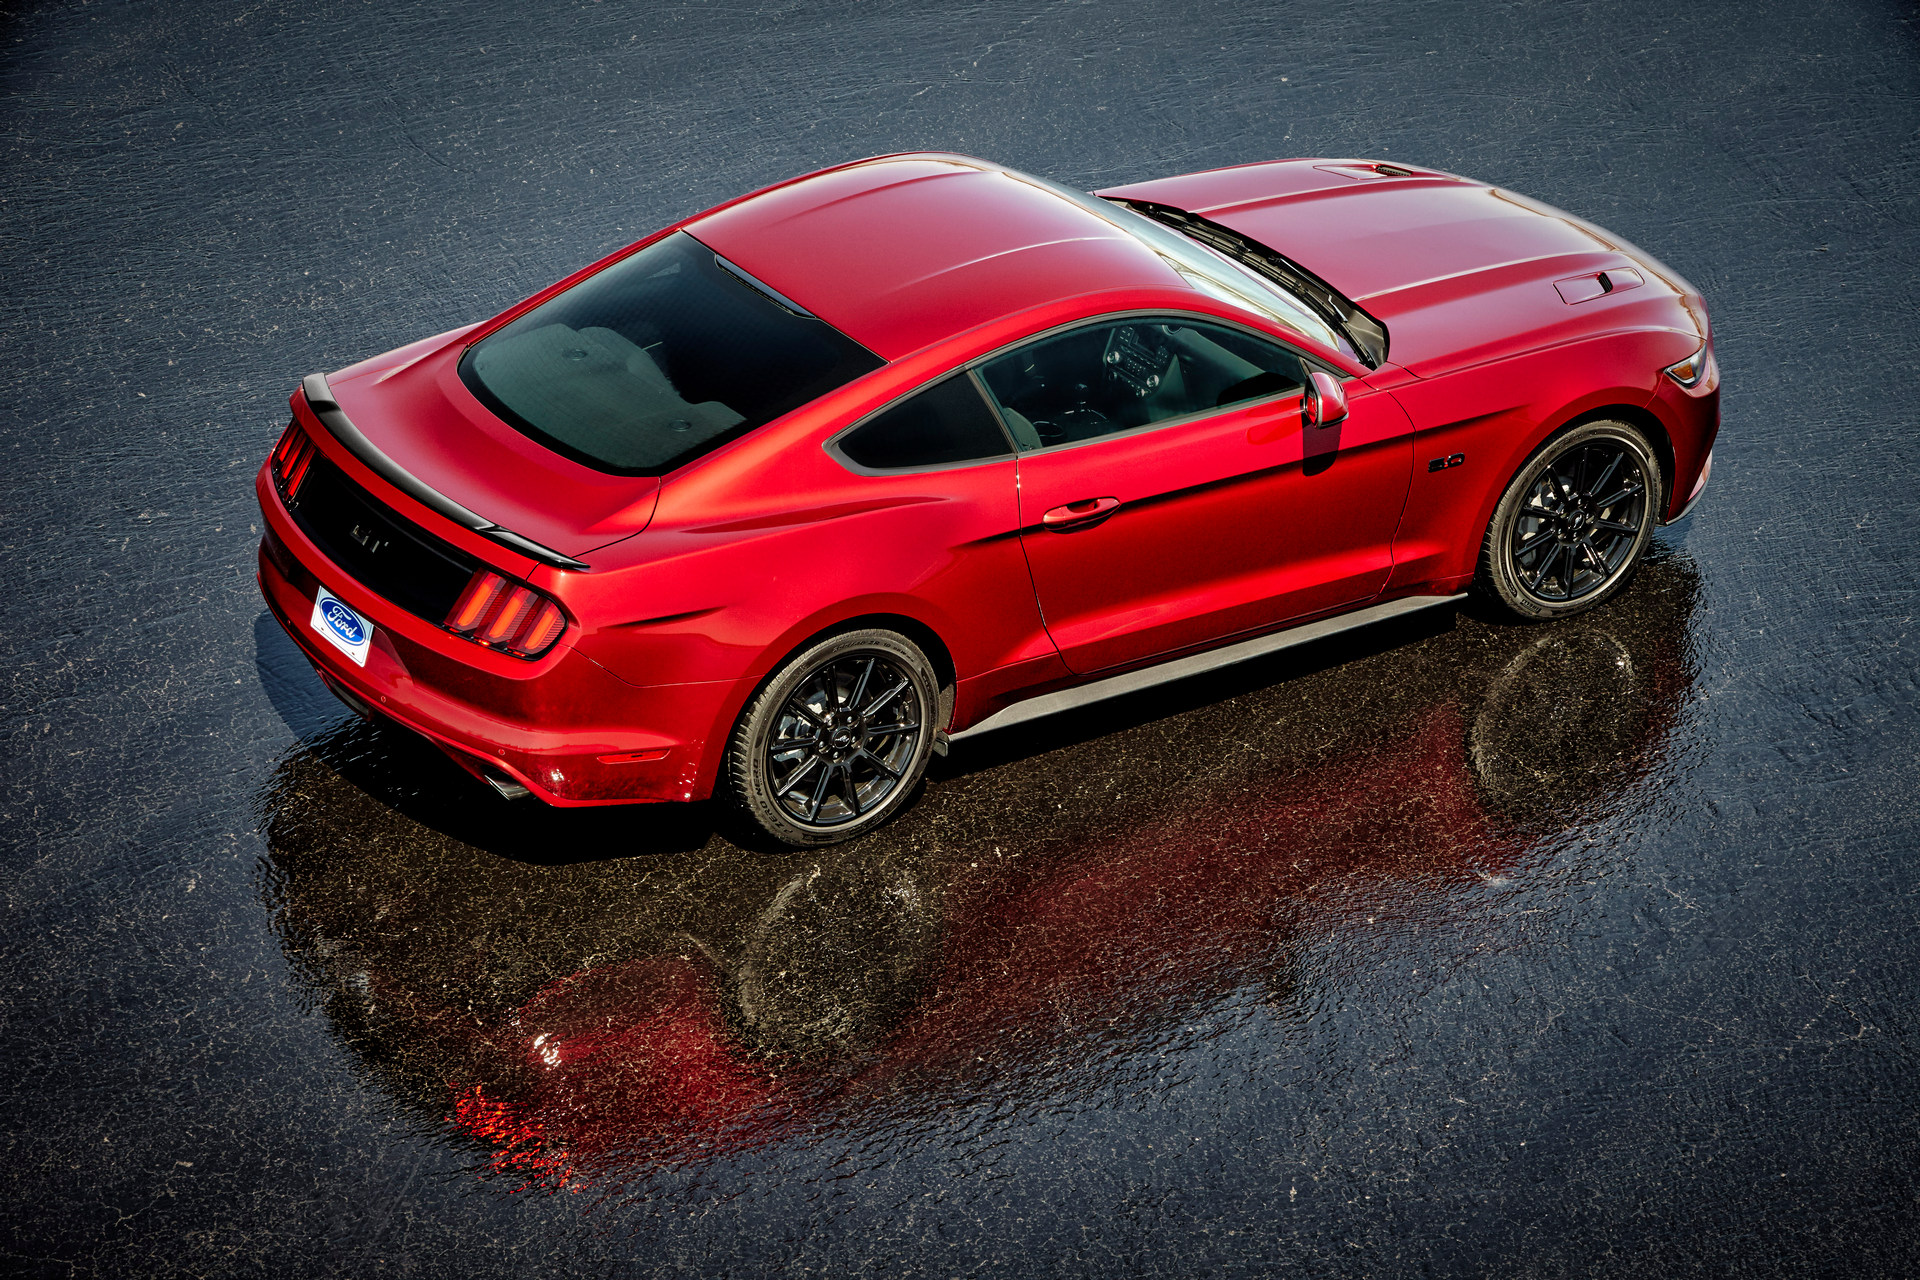 Where is the Ford Mustang Made?